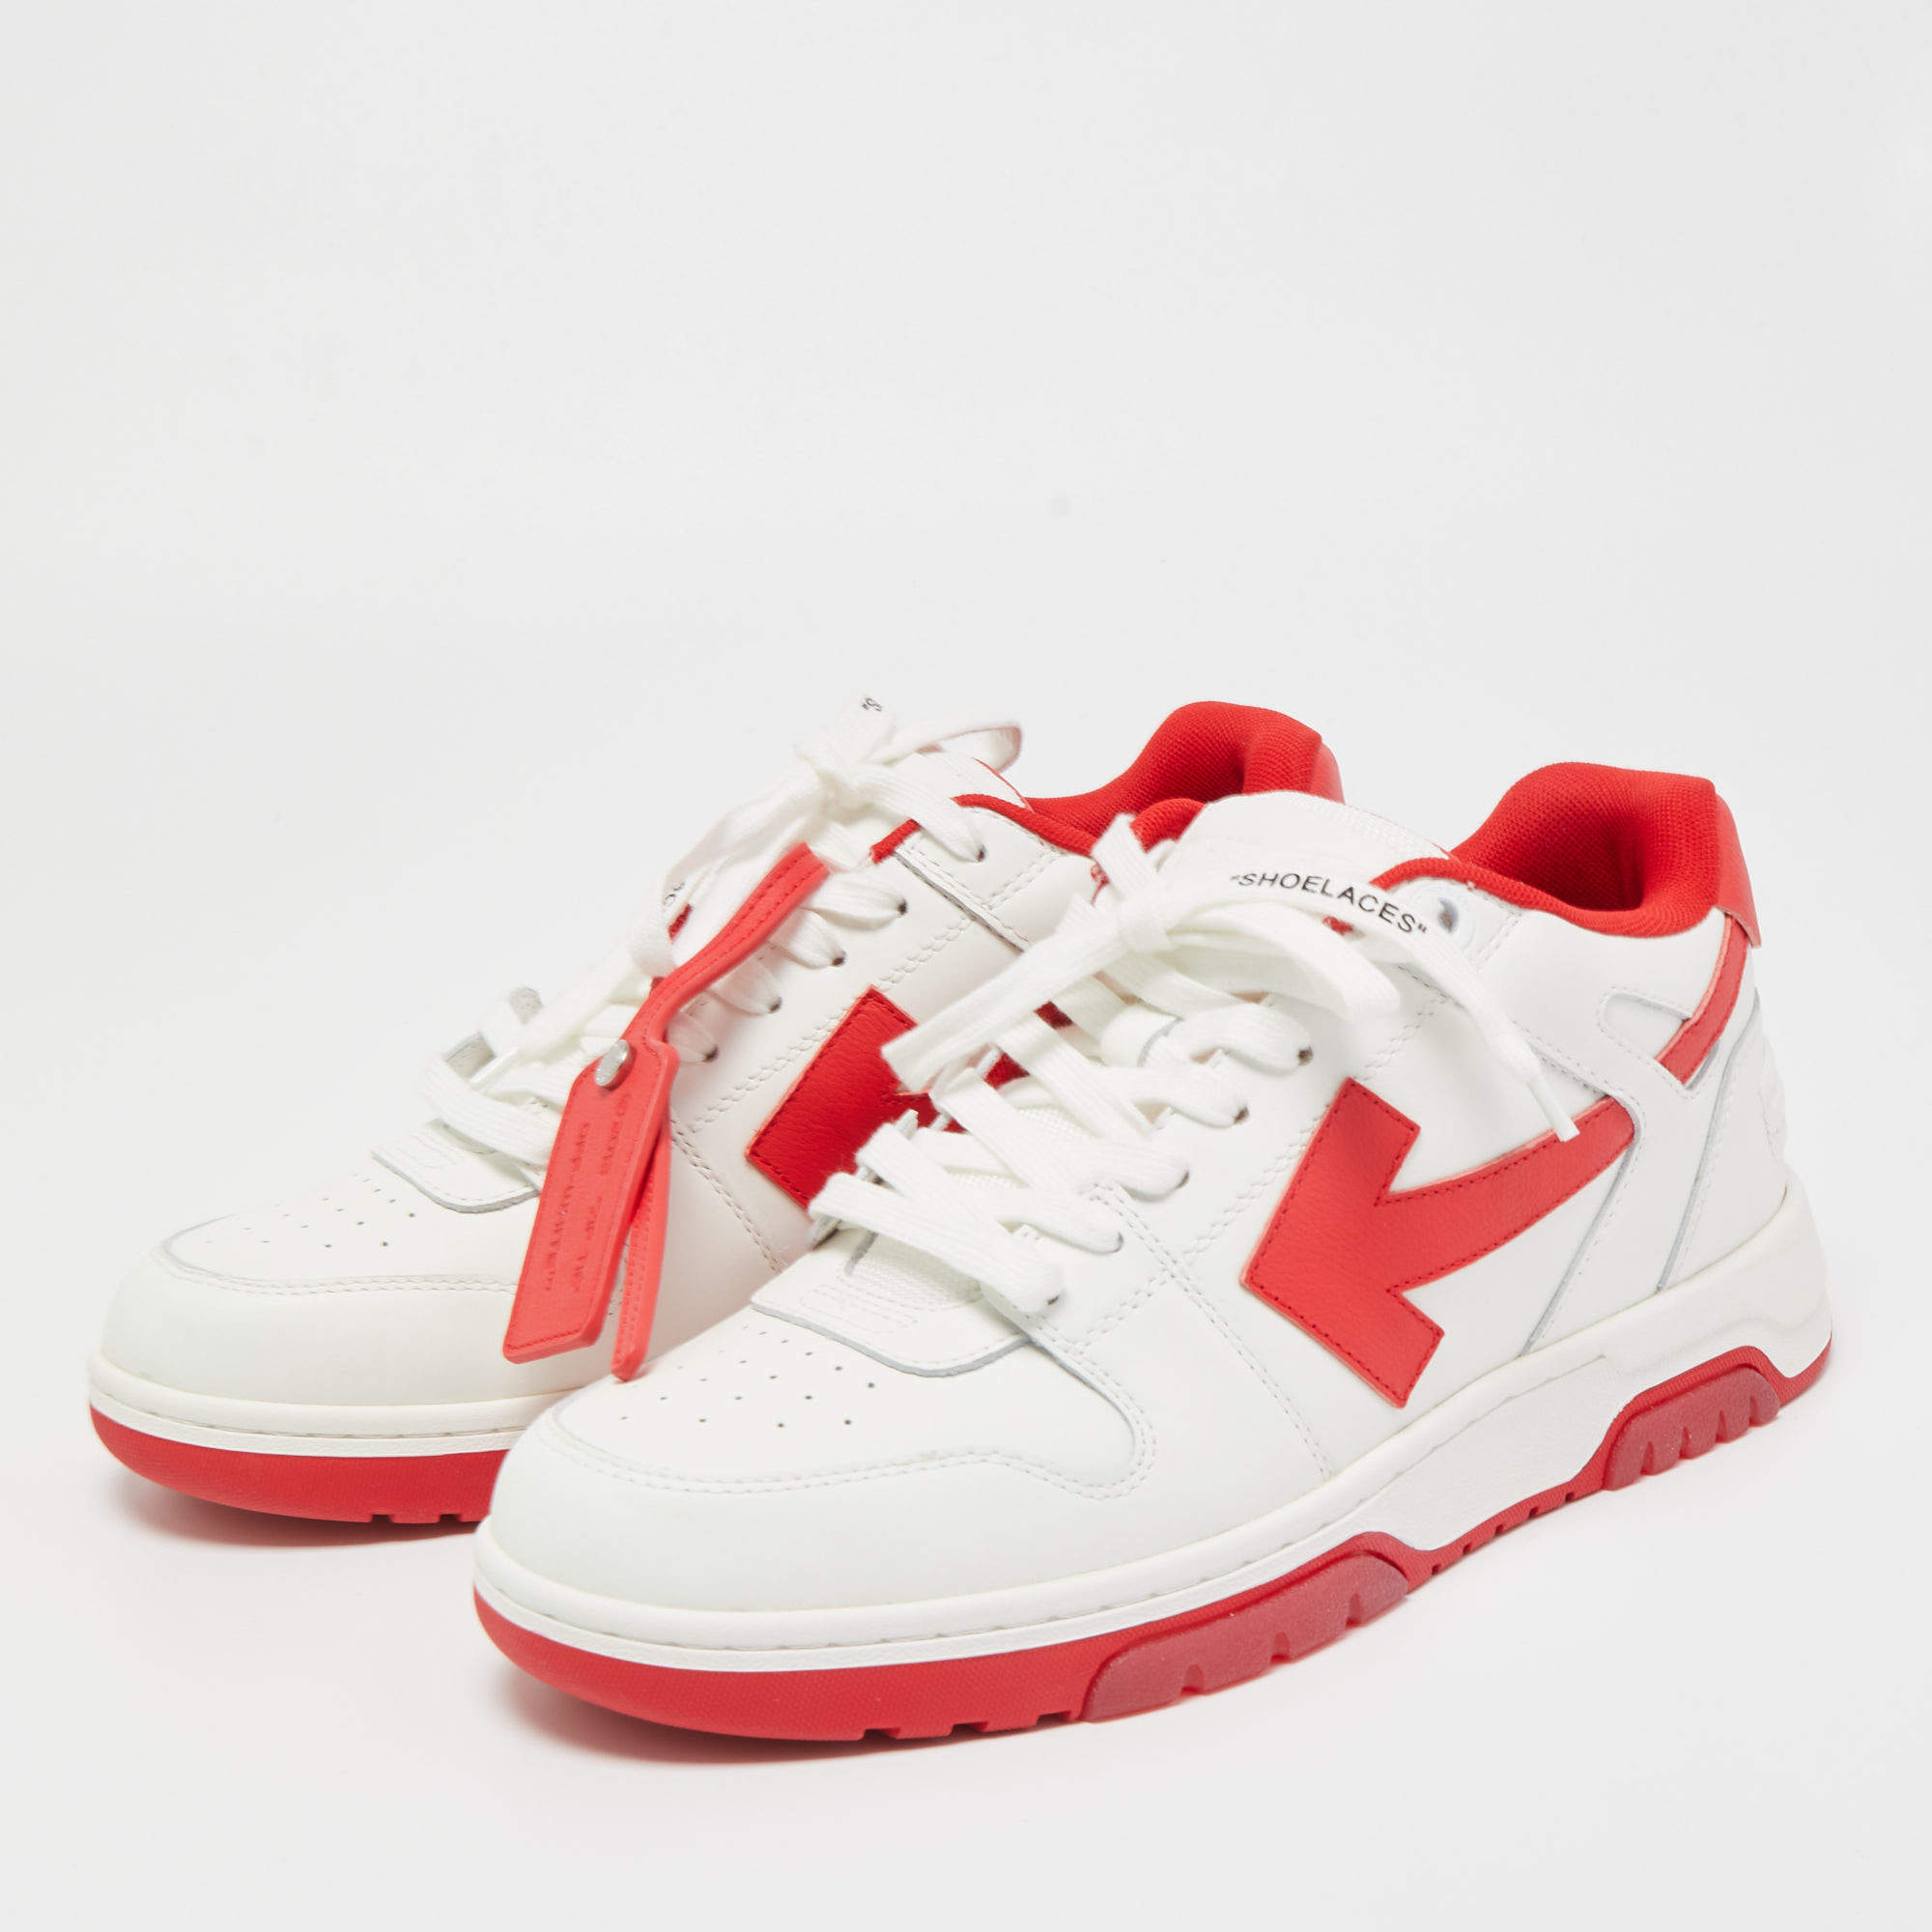 Luxury men's sneakers - Out of Office Off-White sneakers in white